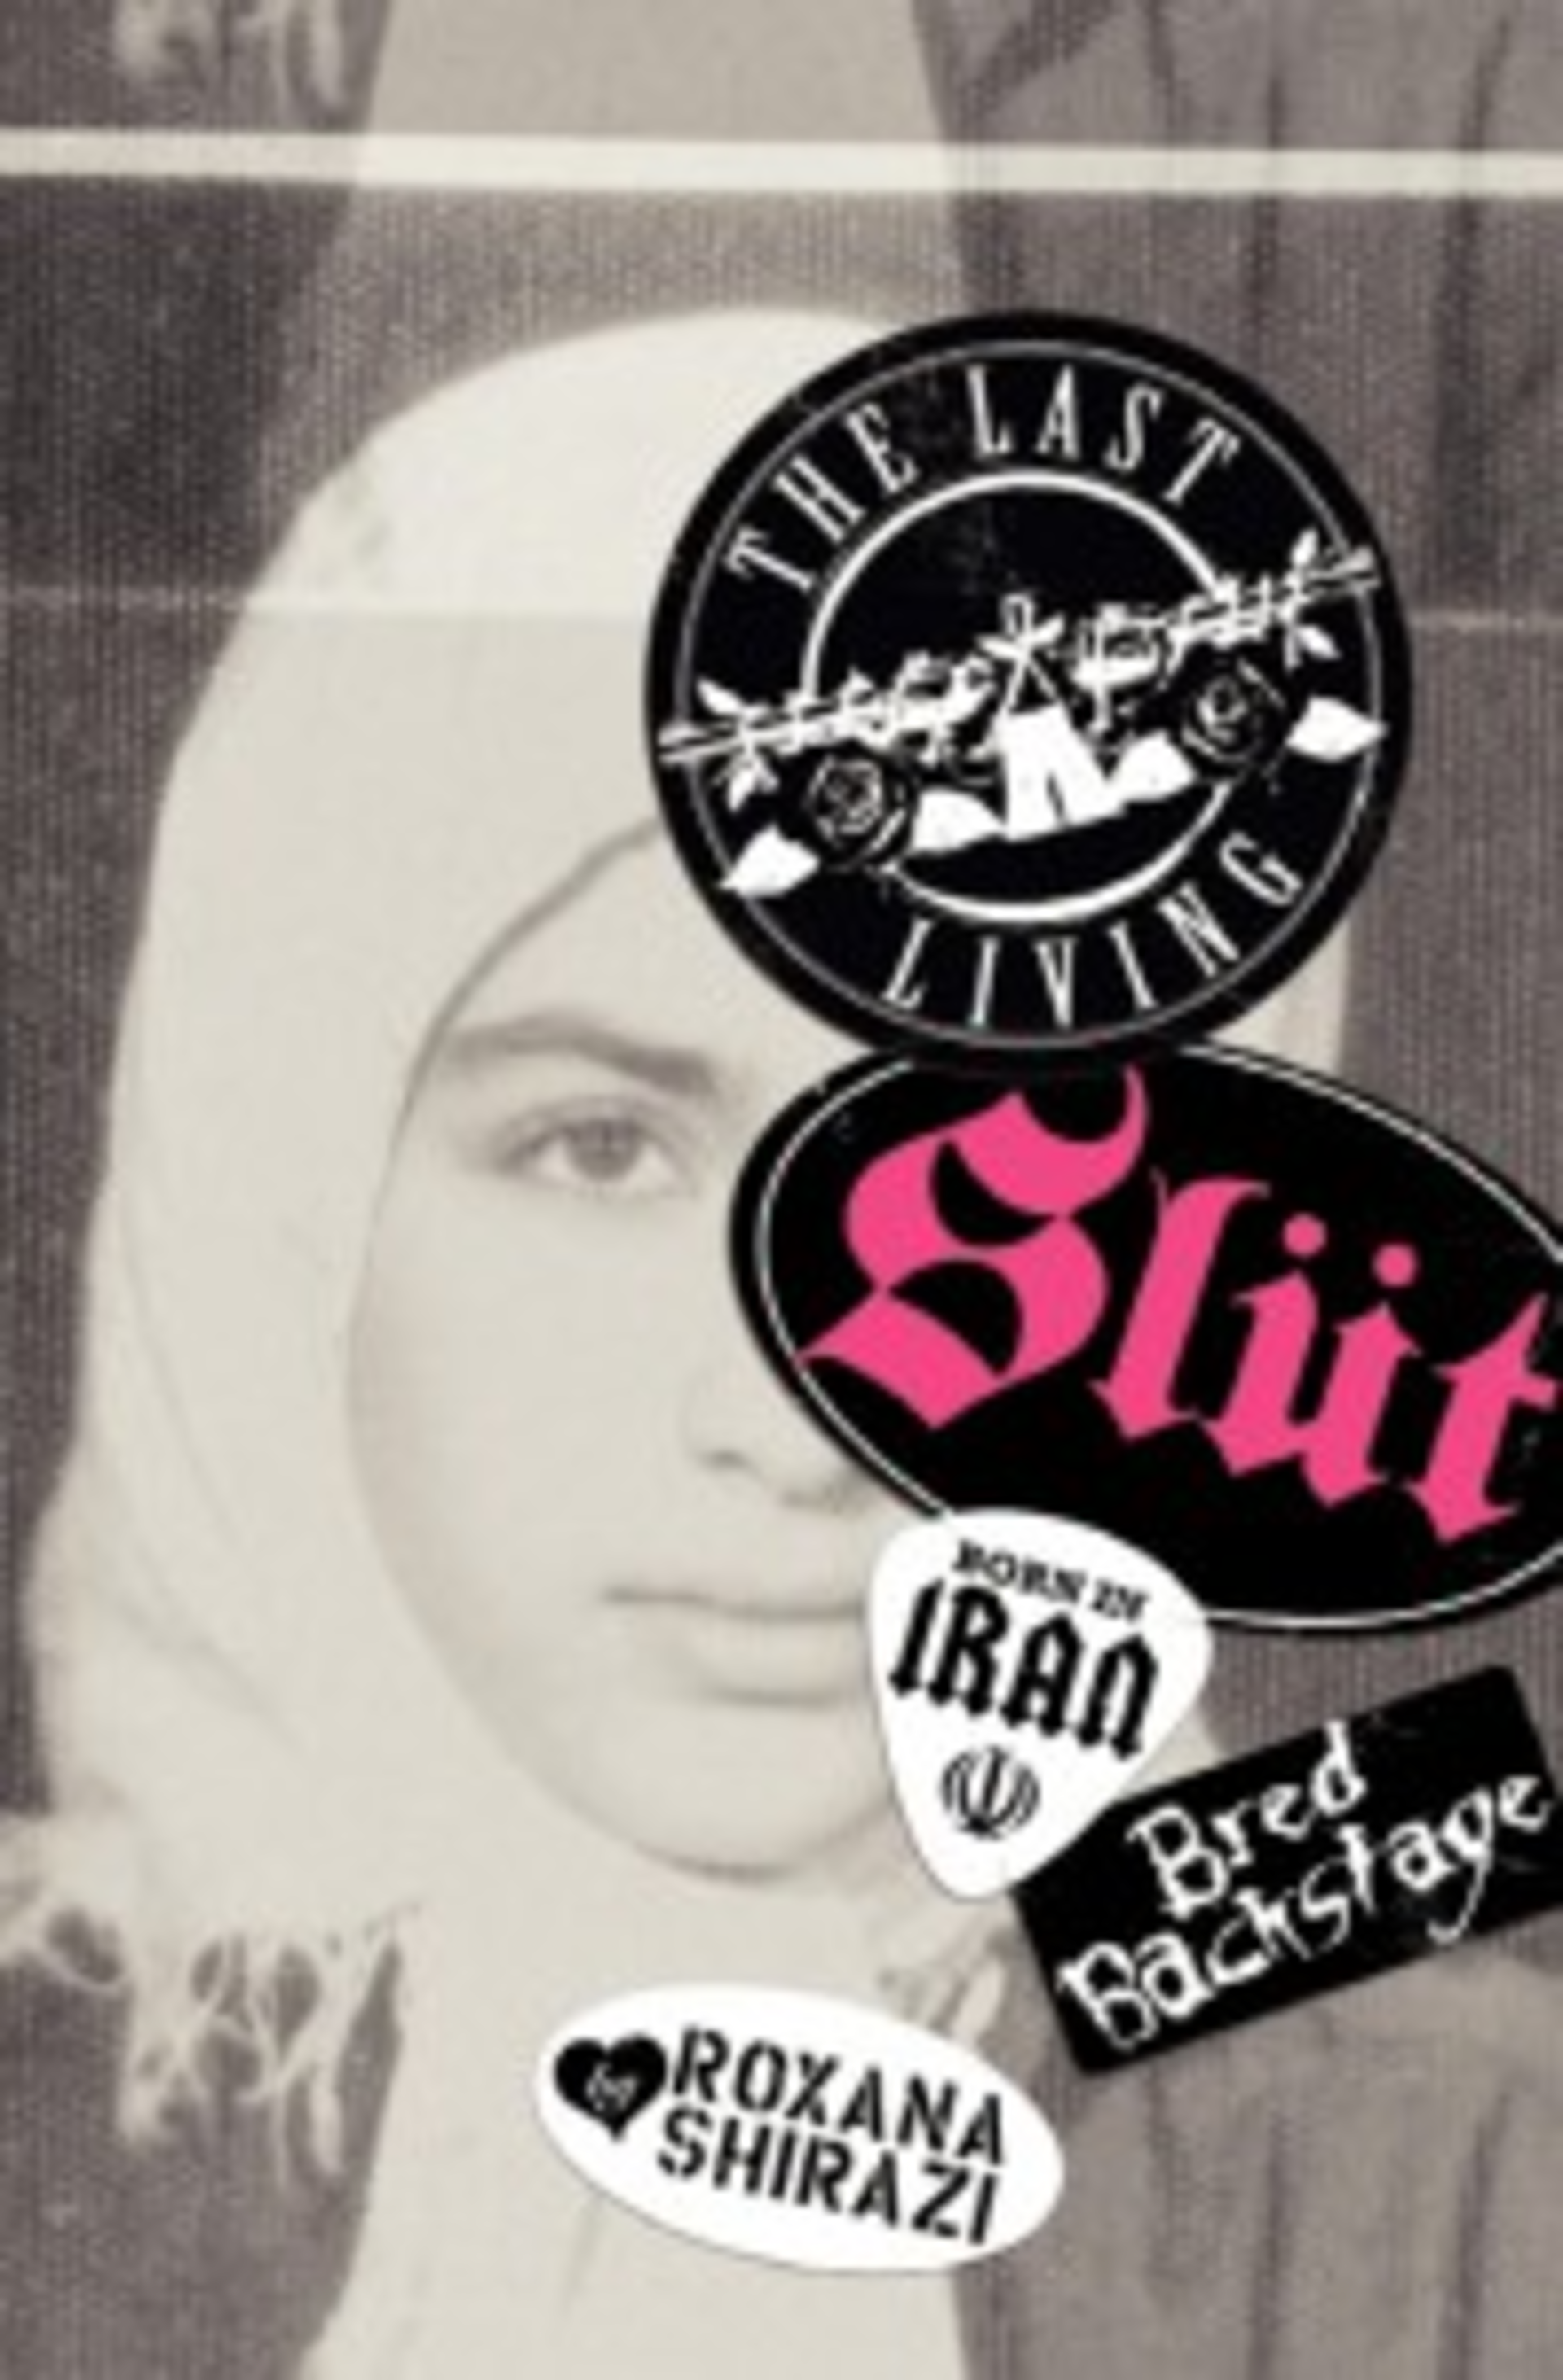 Interview with Roxana Shirazi, author of The Last Living Slut Born in Iran, Bred Backstage, starring Nikki Sixx, Axl Rose, Avenged Sevenfold .. picture